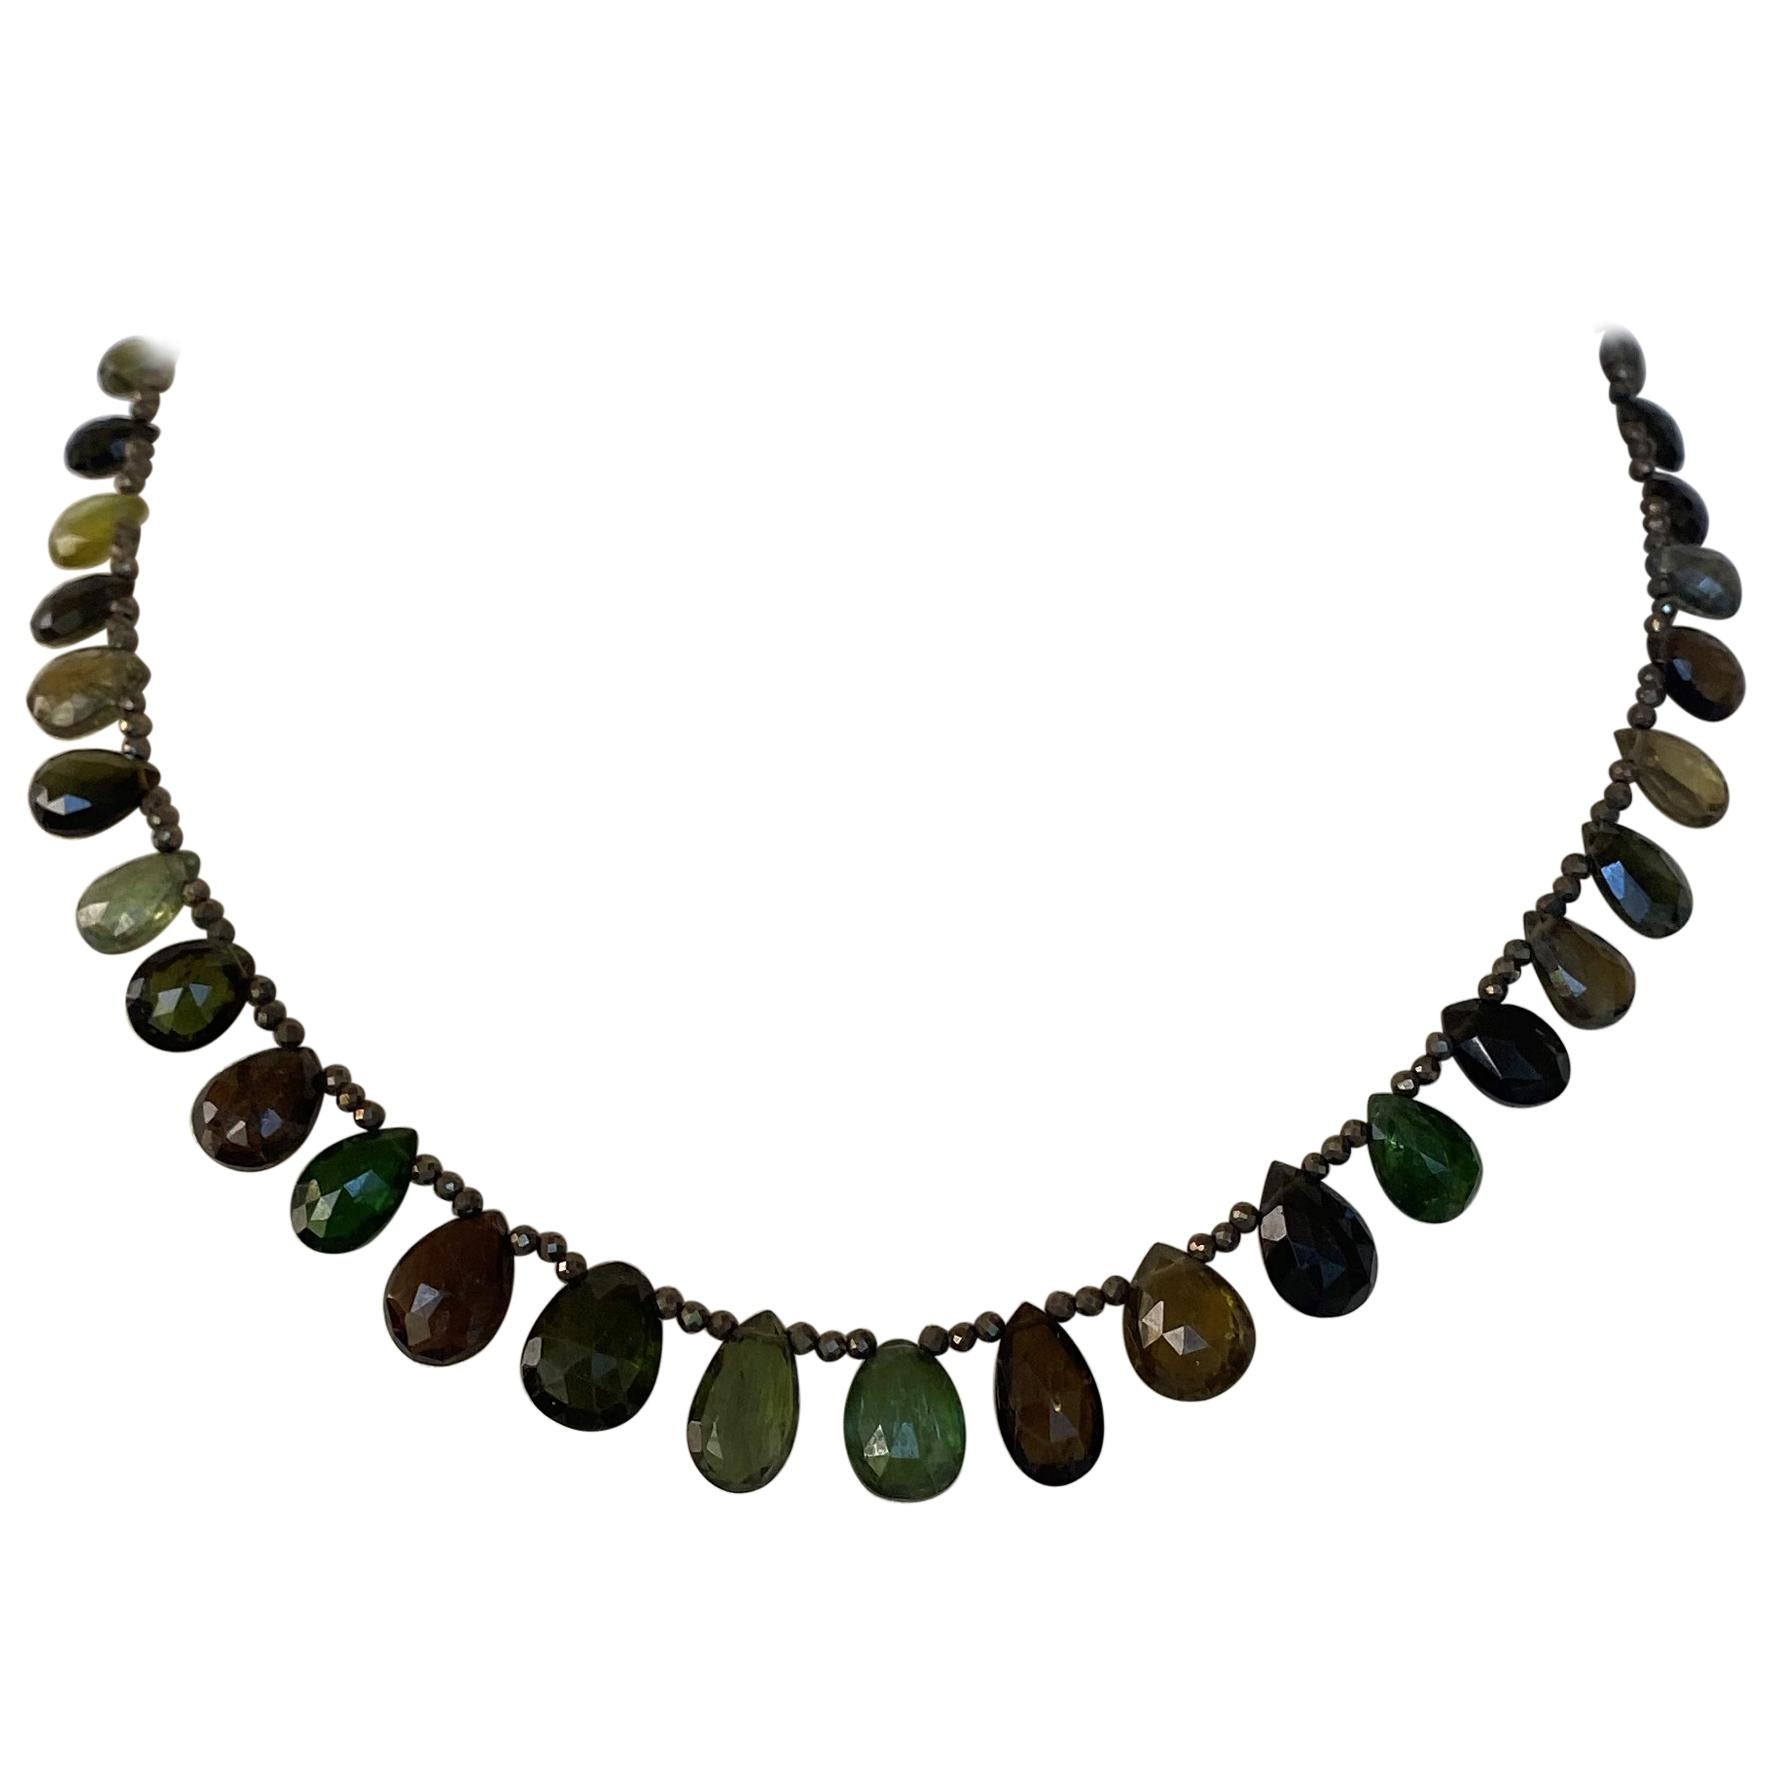 
Faceted Brown and Green Spinel beads decorated with faceted/ multi-colored/ teardrop Green Tourmaline briolettes that graduate in size. This necklace is secured with a sterling silver clasp and measures 16 inches long, that provides an elegant and